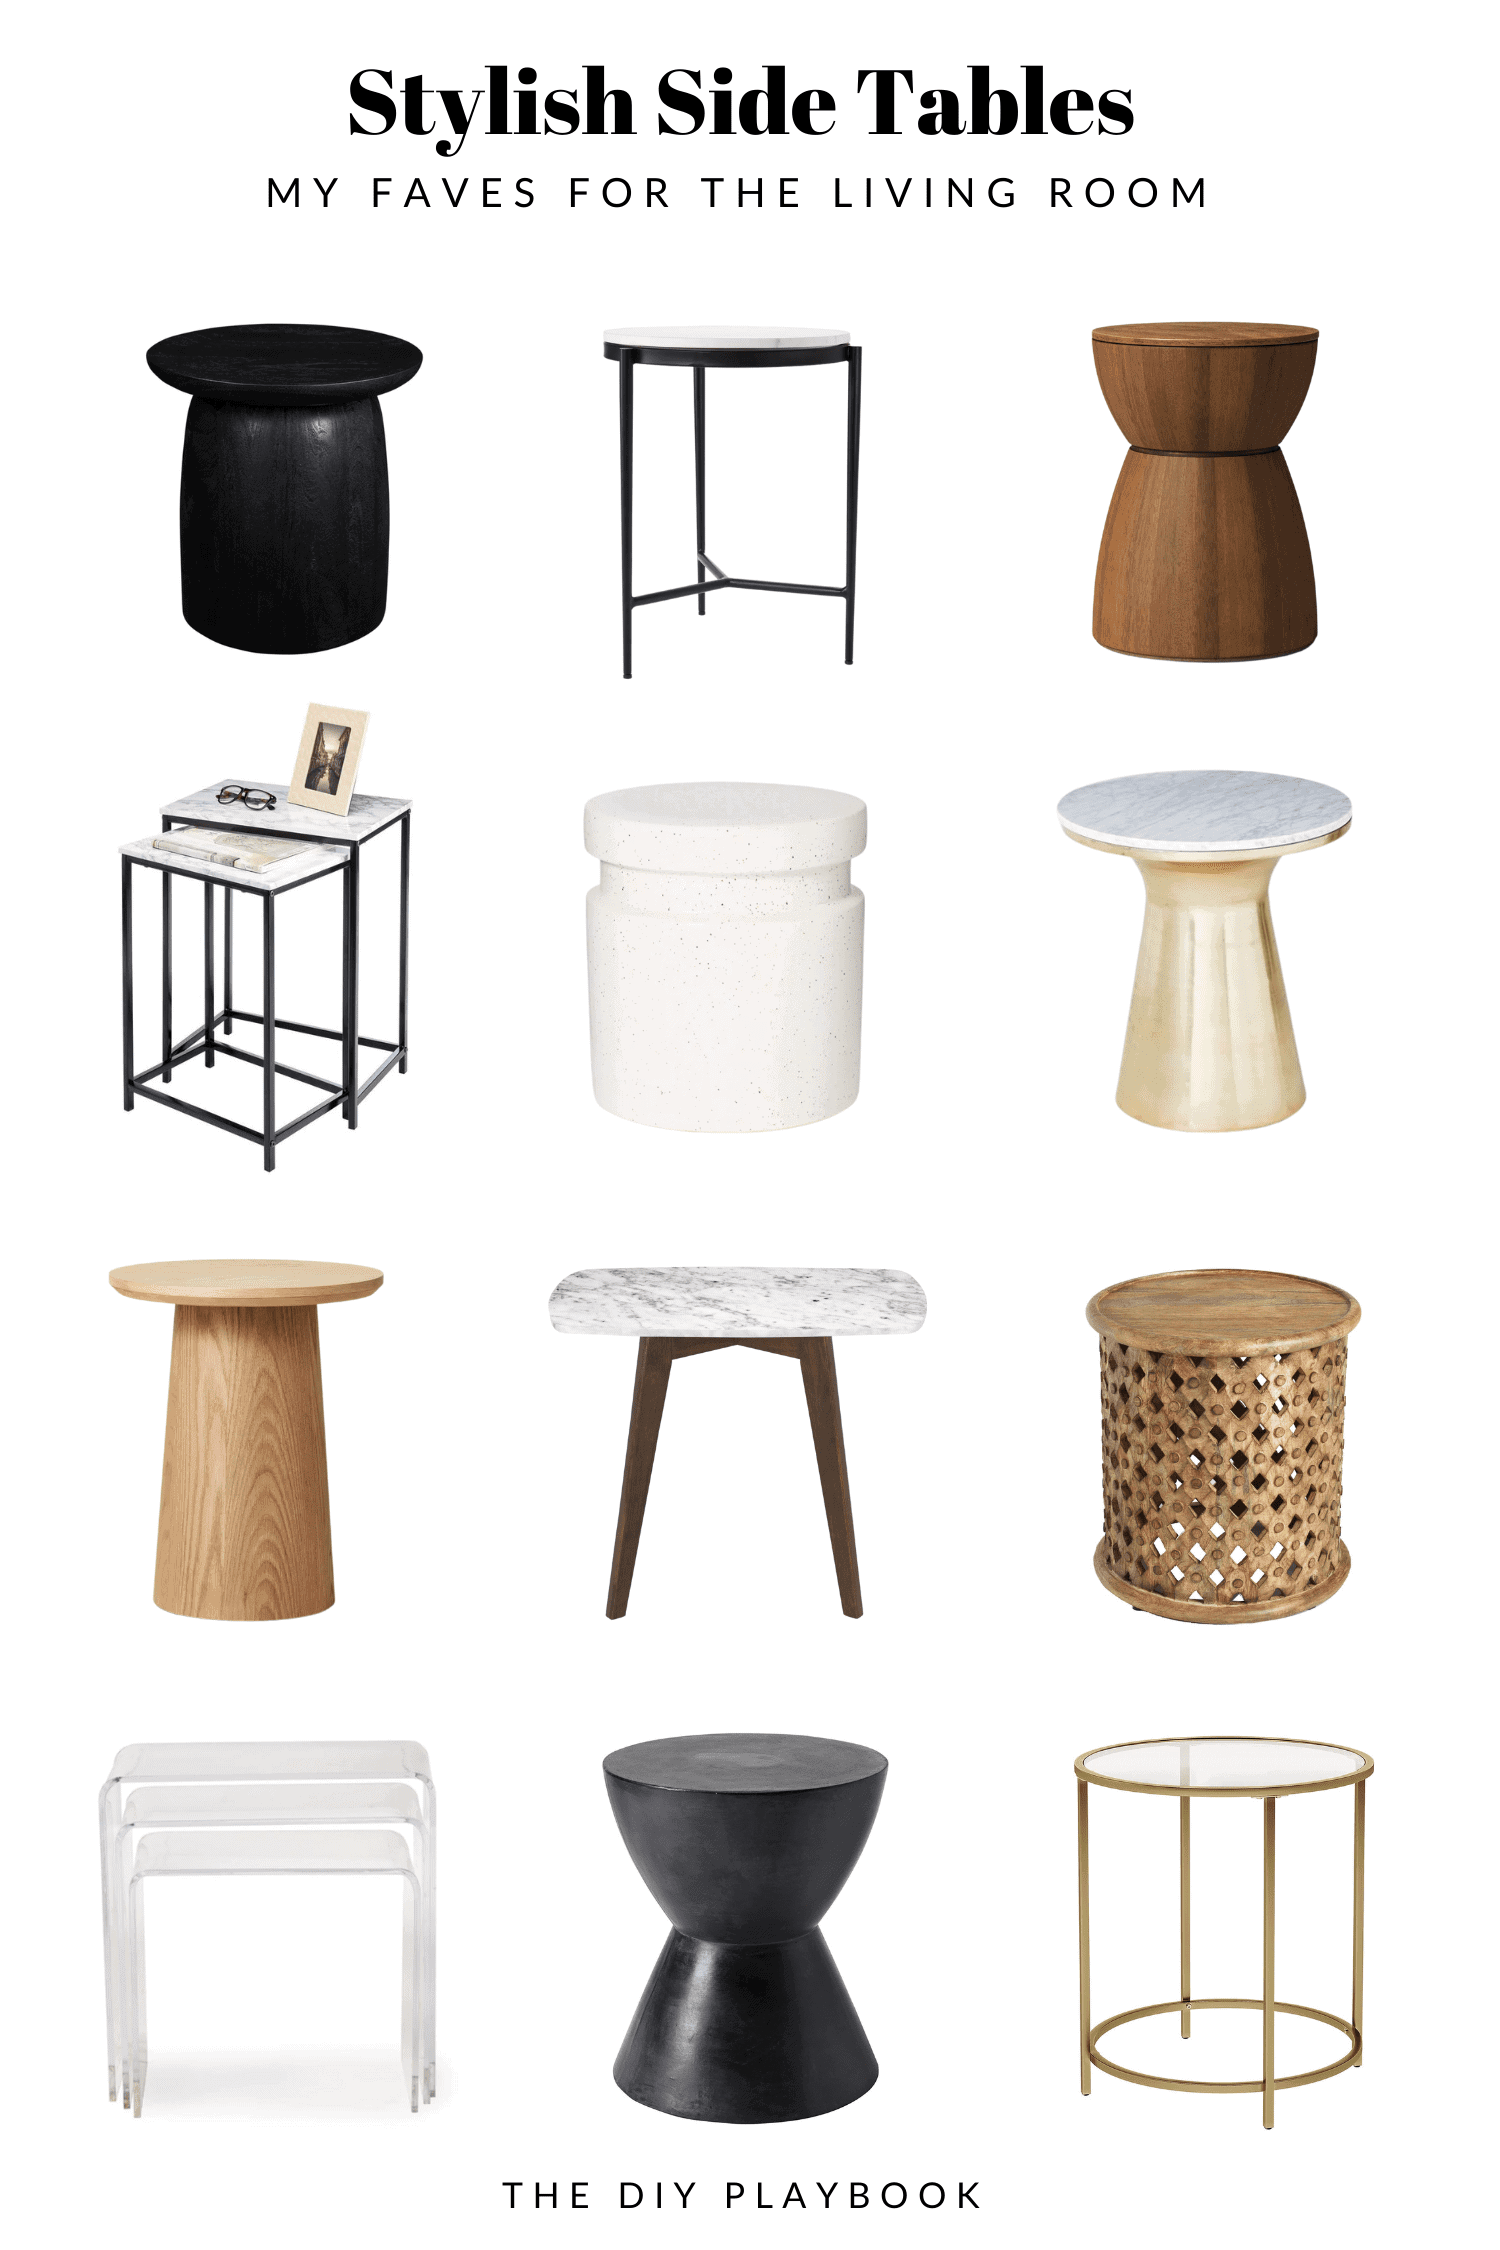 My favorite stylish side tables between chairs